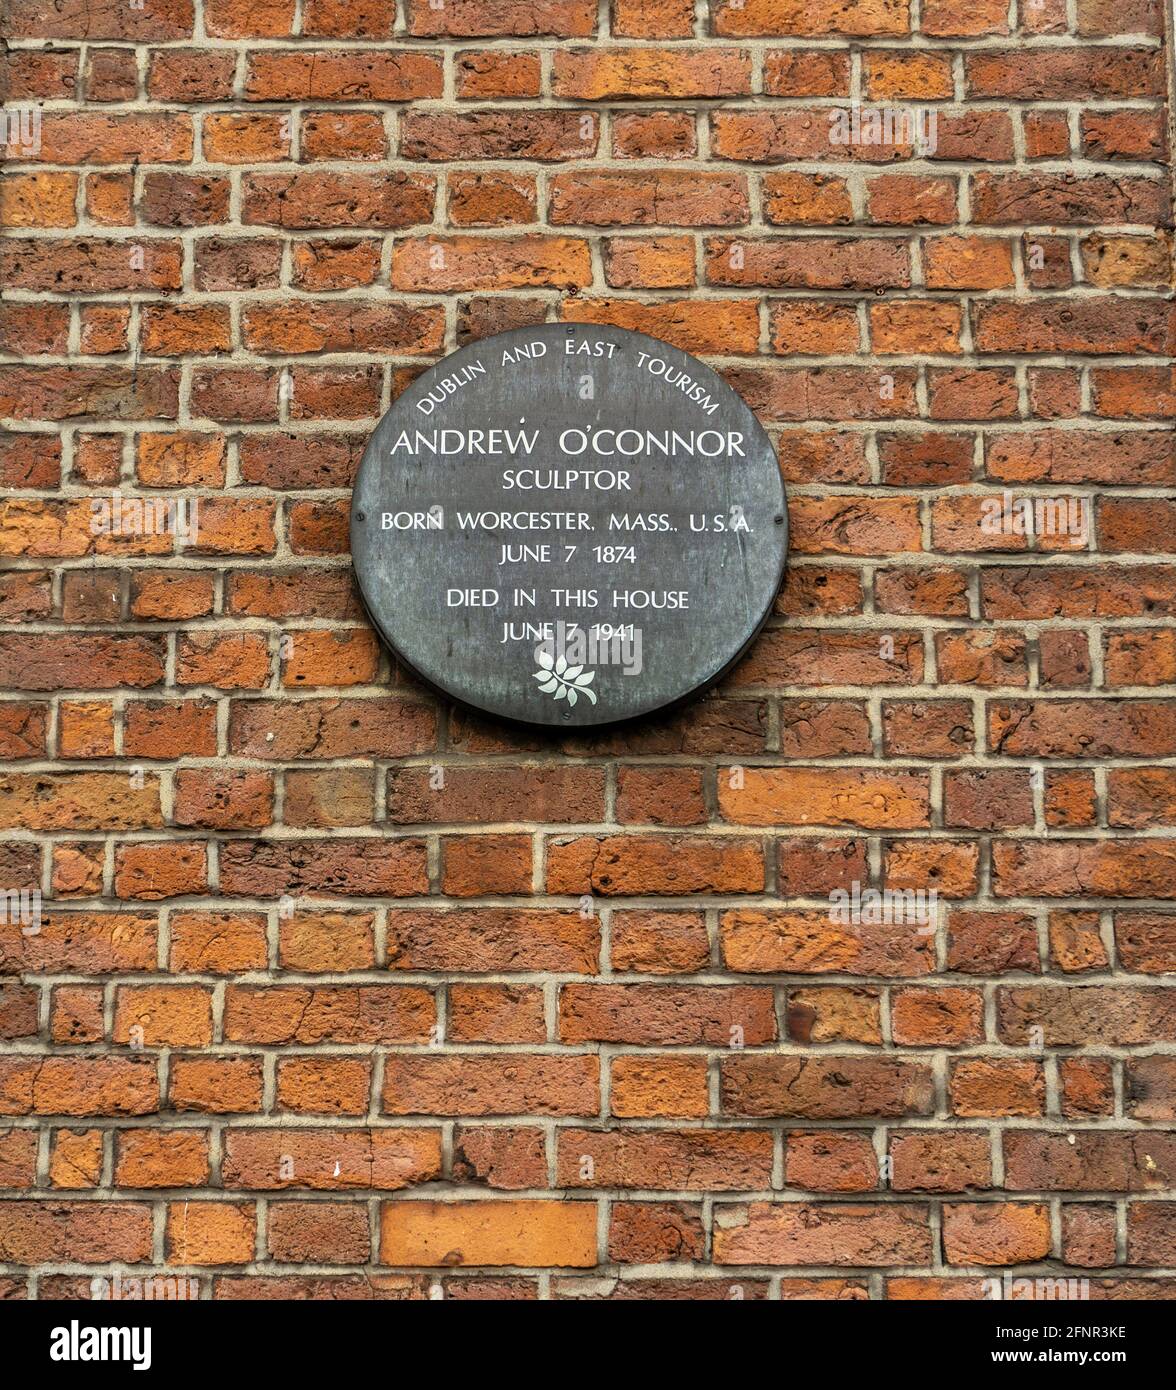 A plaque on the wall of 77 Merrion Square commemorating the Irish American sculptor, Andrew O’Connor who died in this house in 1941. Stock Photo